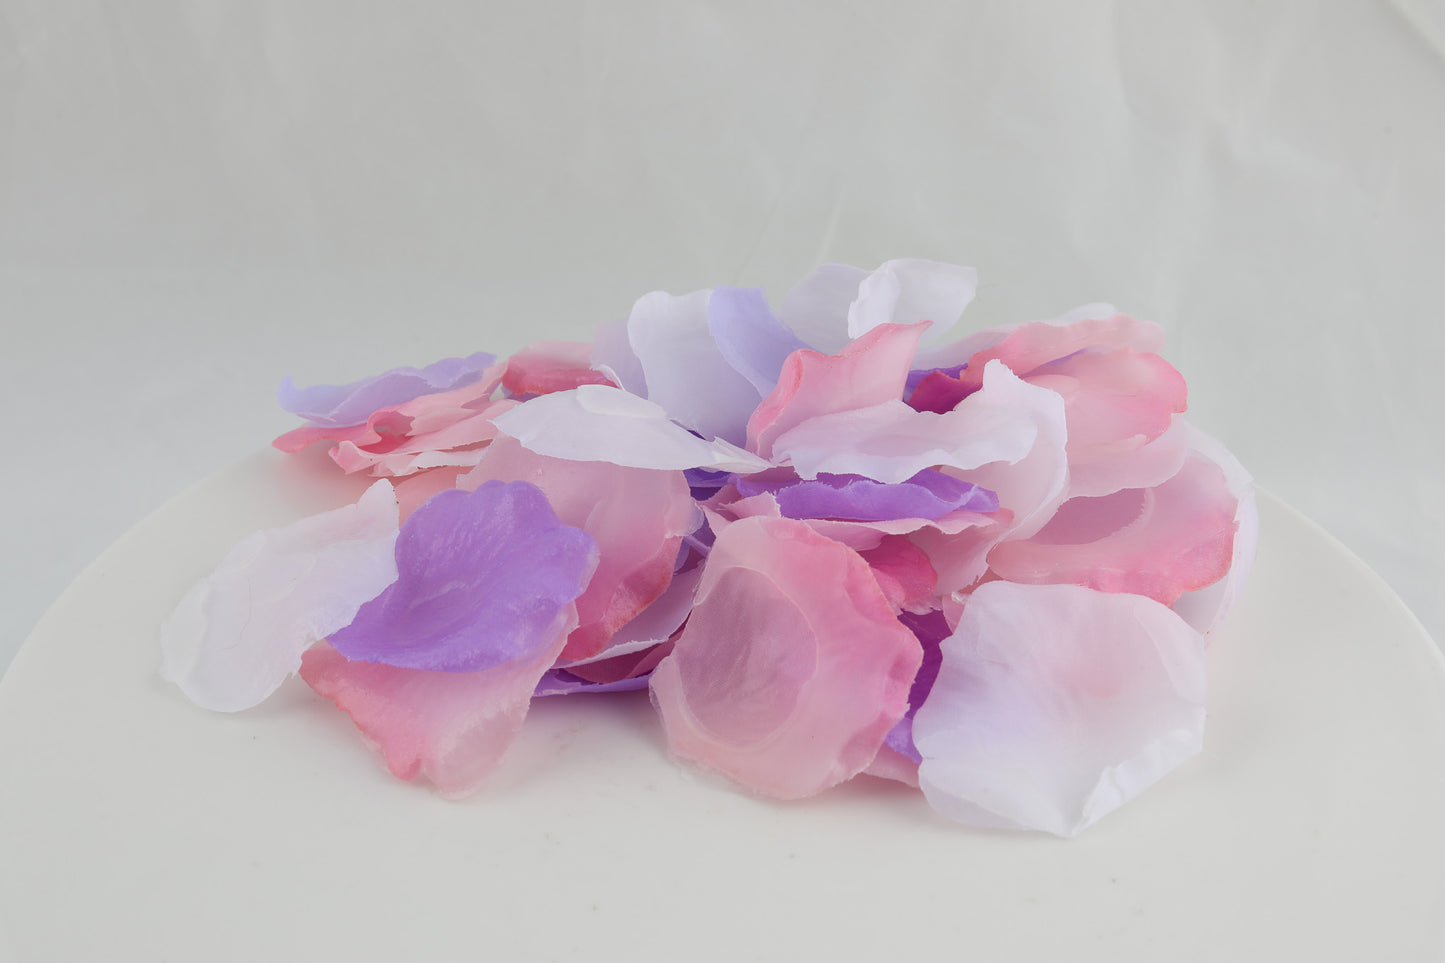 soap shaped as flower petals in pink purple and white